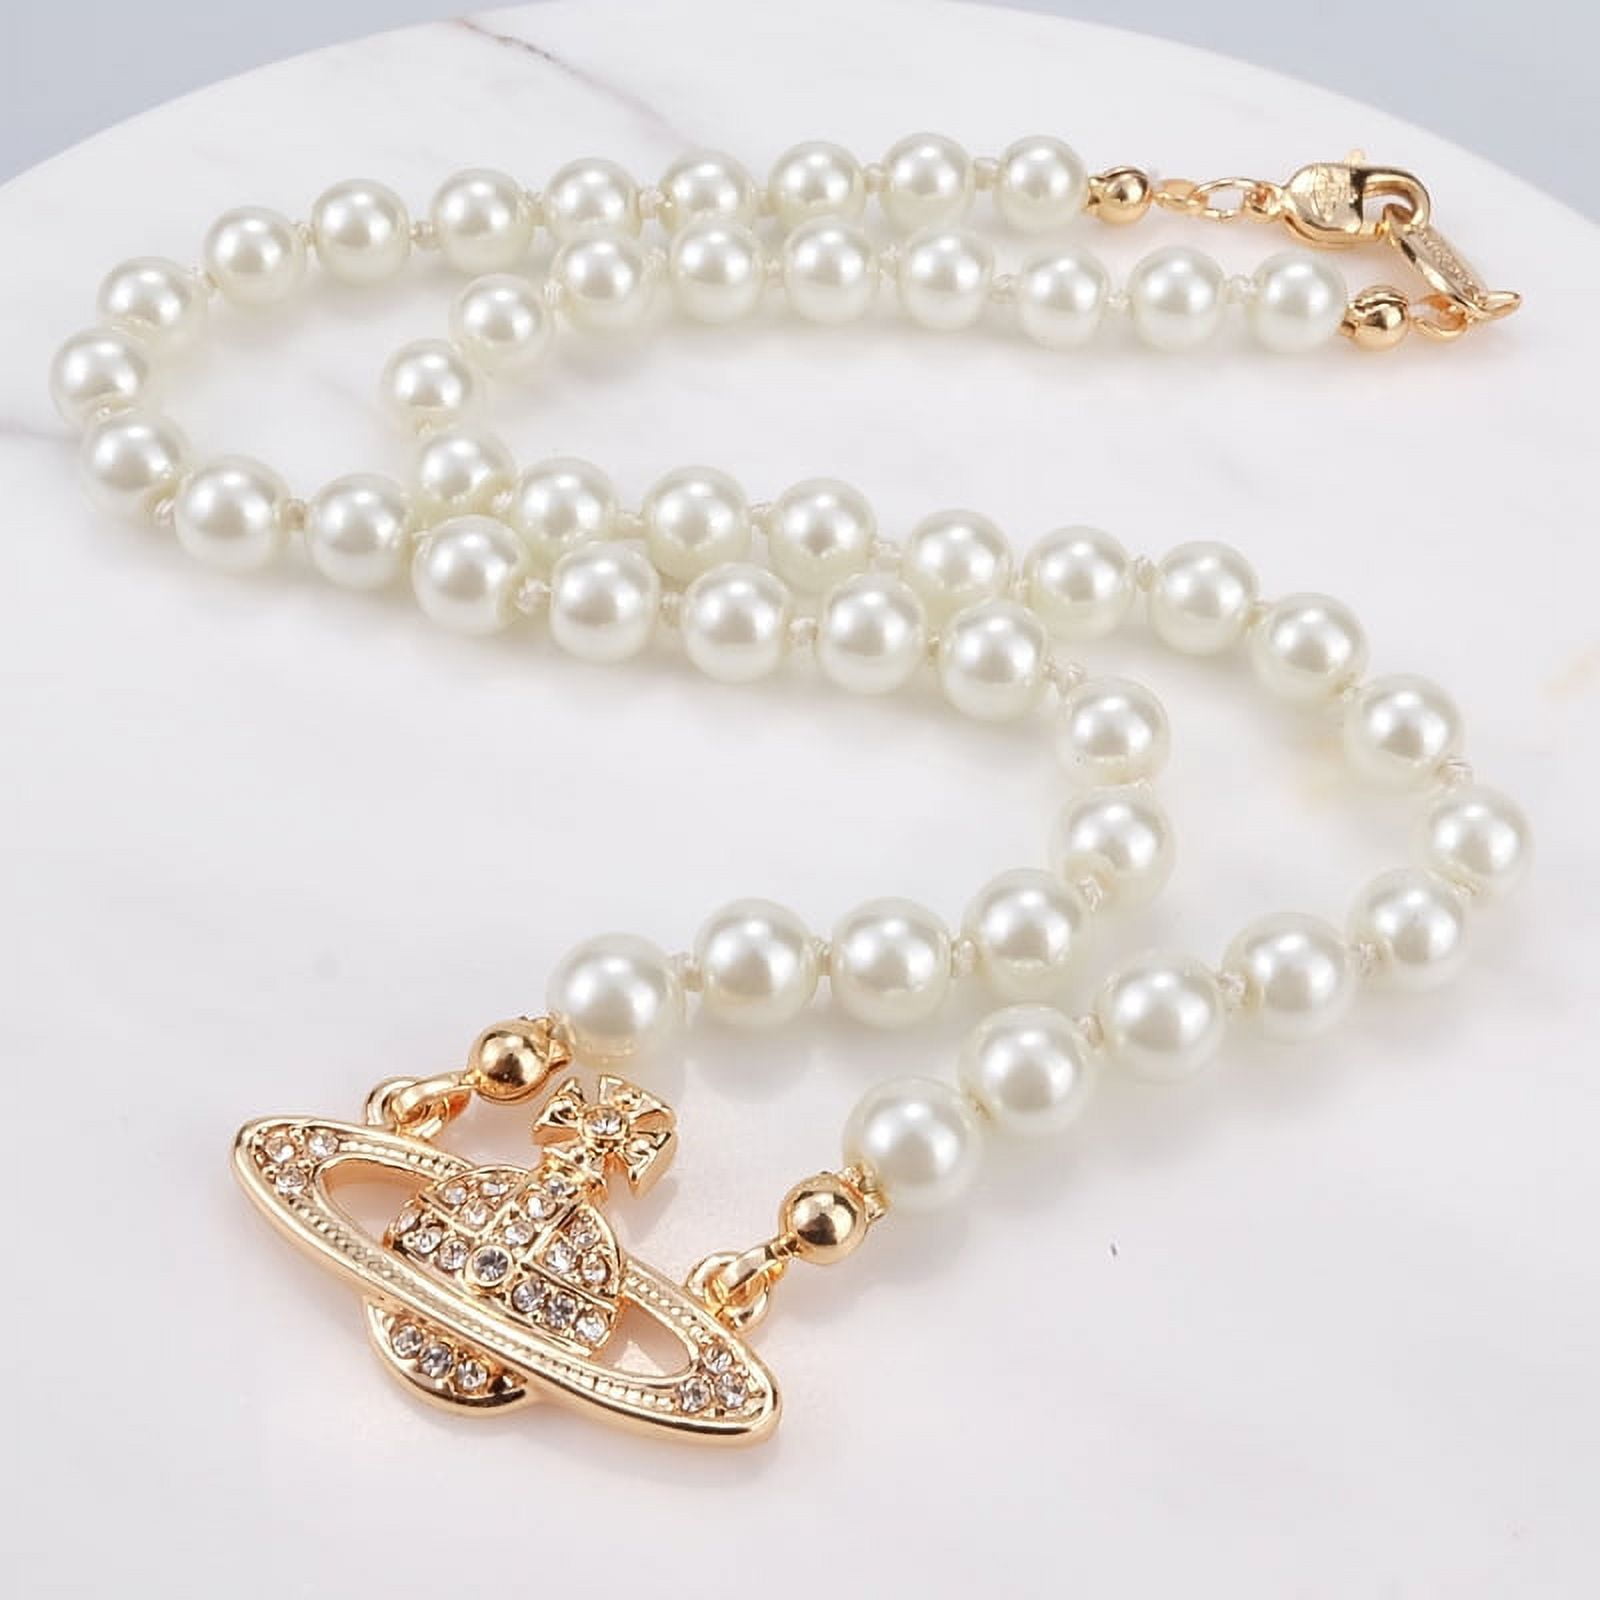 High Quality Fashionable Female Necklace Brand Hot Pearl Chain Channel  Planet Necklace Saturn Pearl Necklace Satellite Clavicle Ccity Chain Punk  Atmosphere Kx5r From Dhs004, $42.39 | DHgate.Com